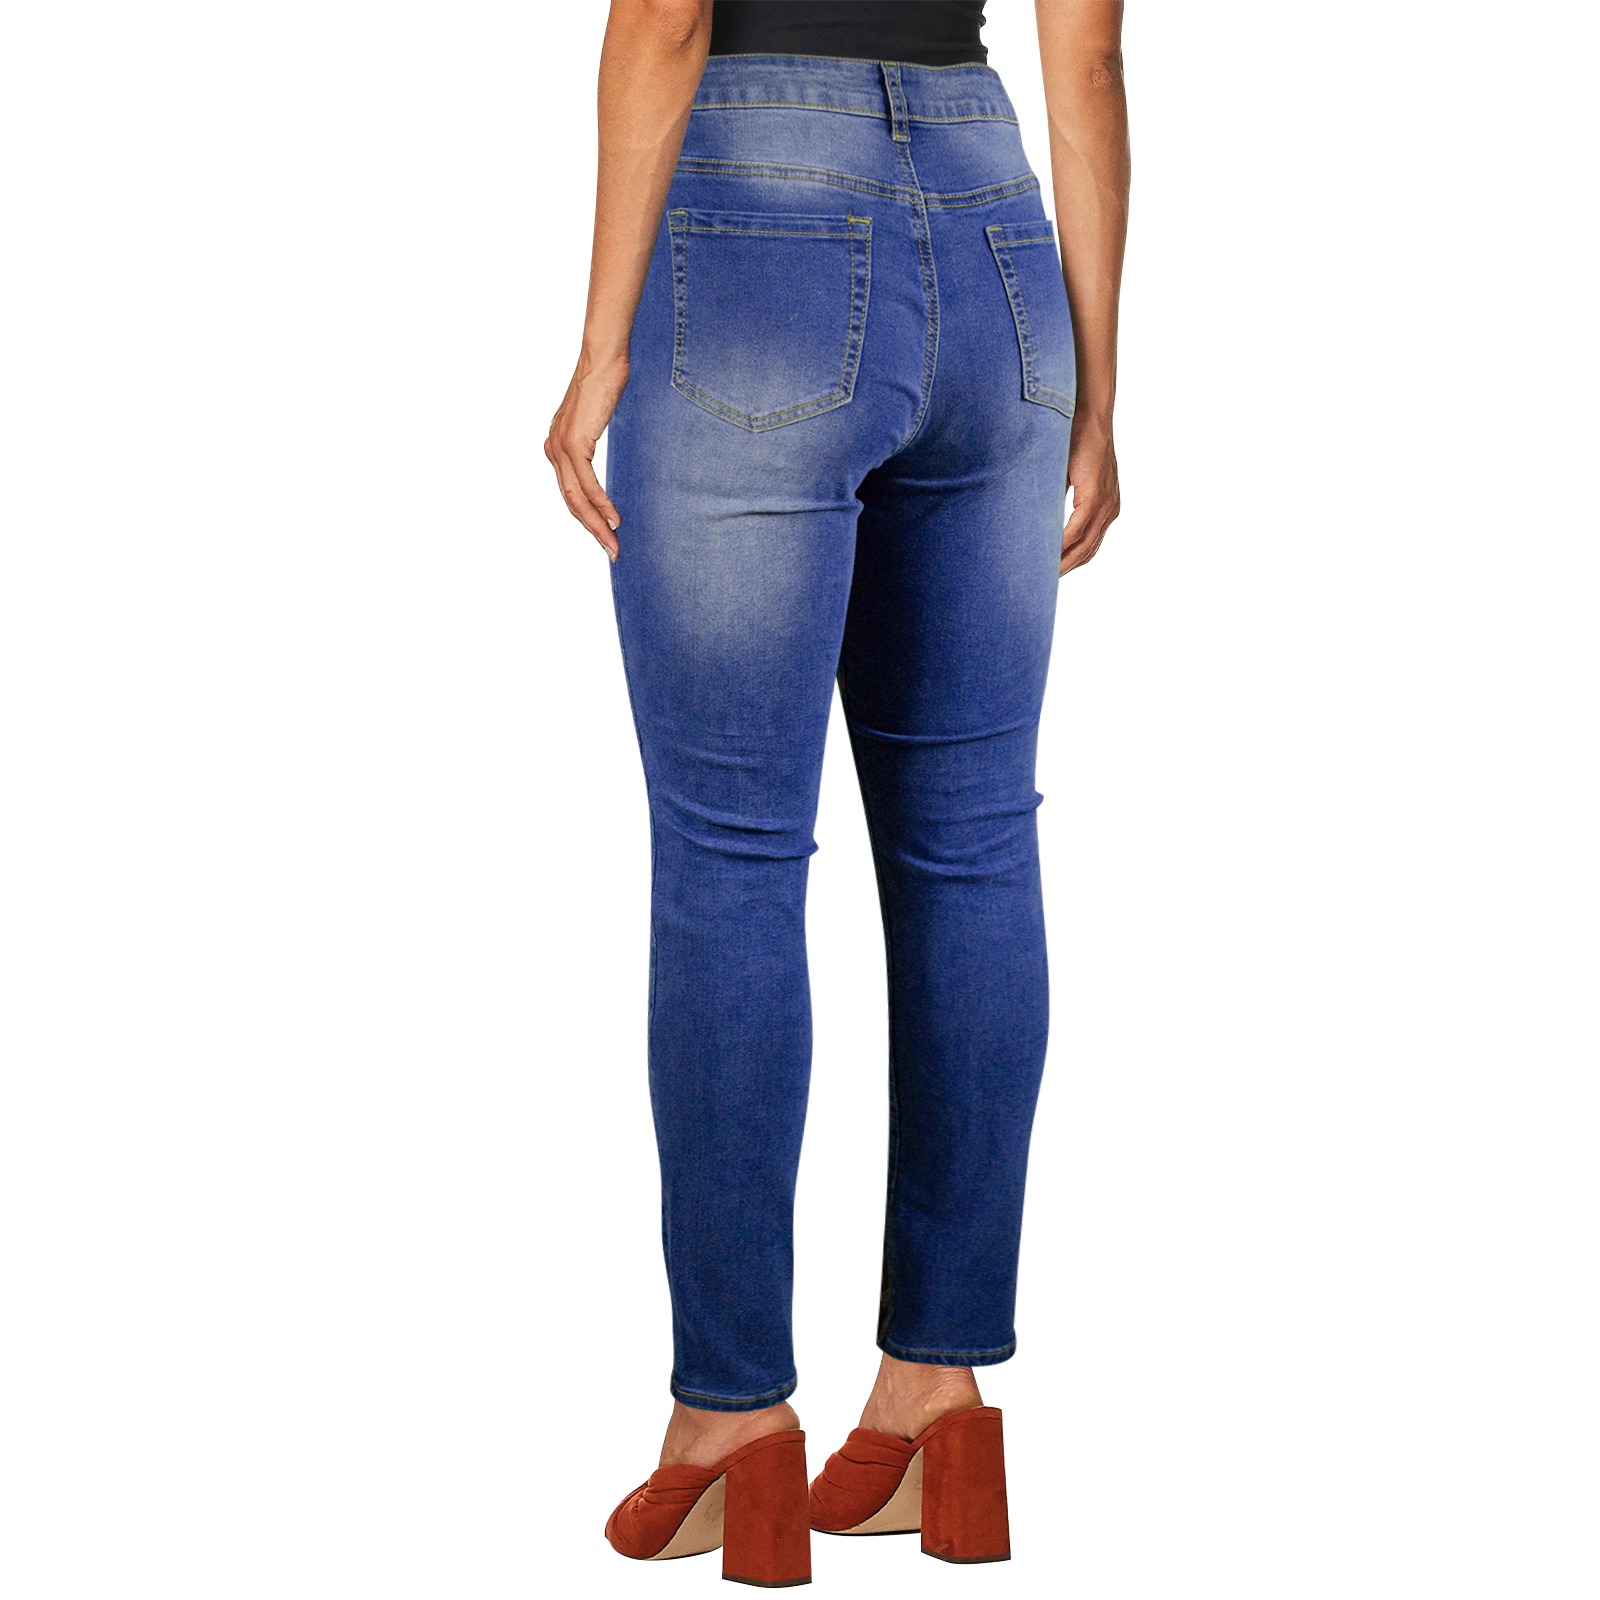 Women's Jeans (Front Printing)